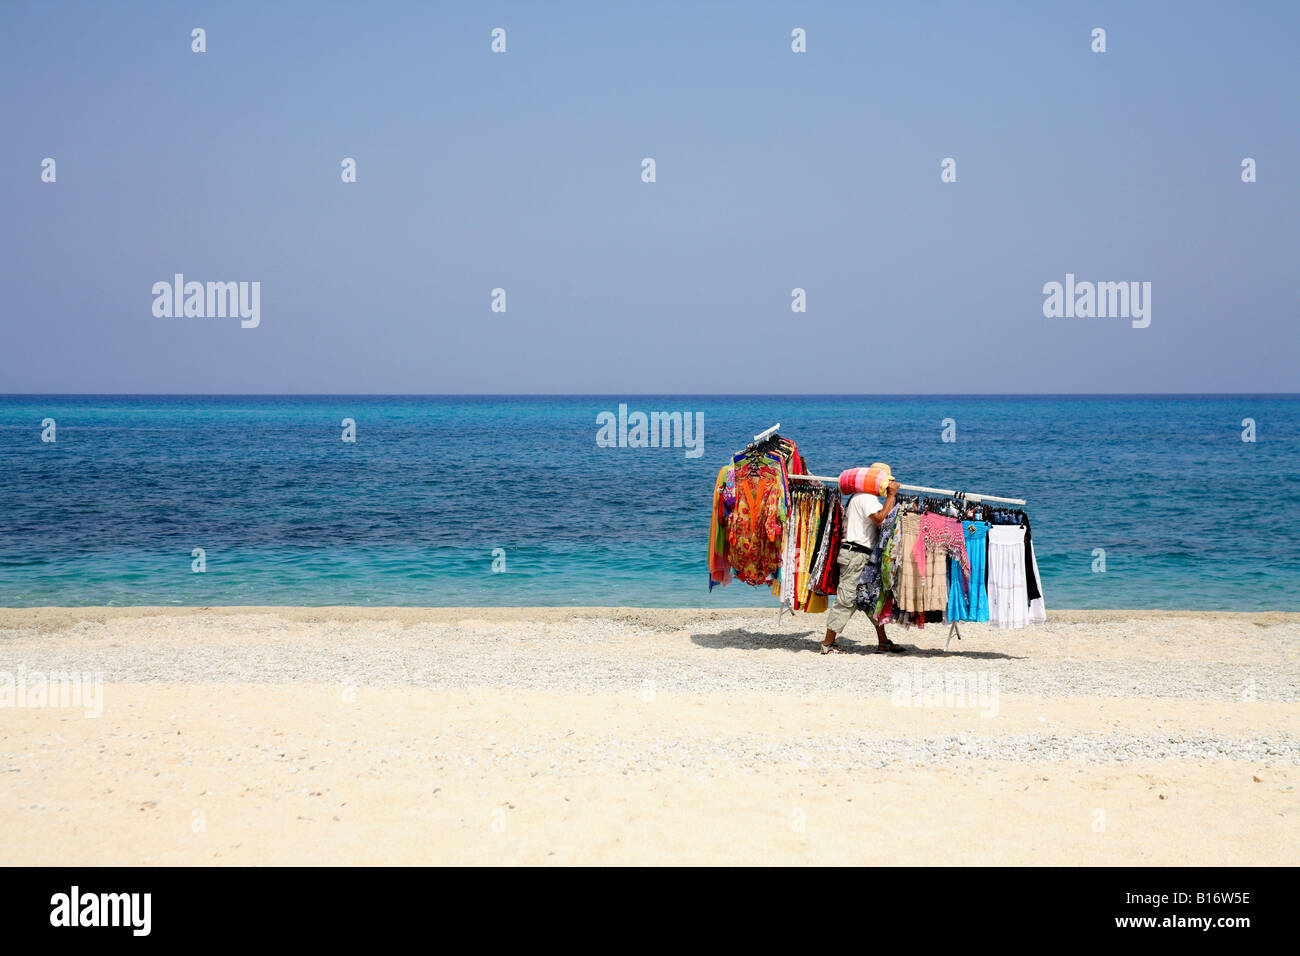 a beach seller walks along the sand carrying a large load of goods to sell to torists and holiday makers. Stock Photo